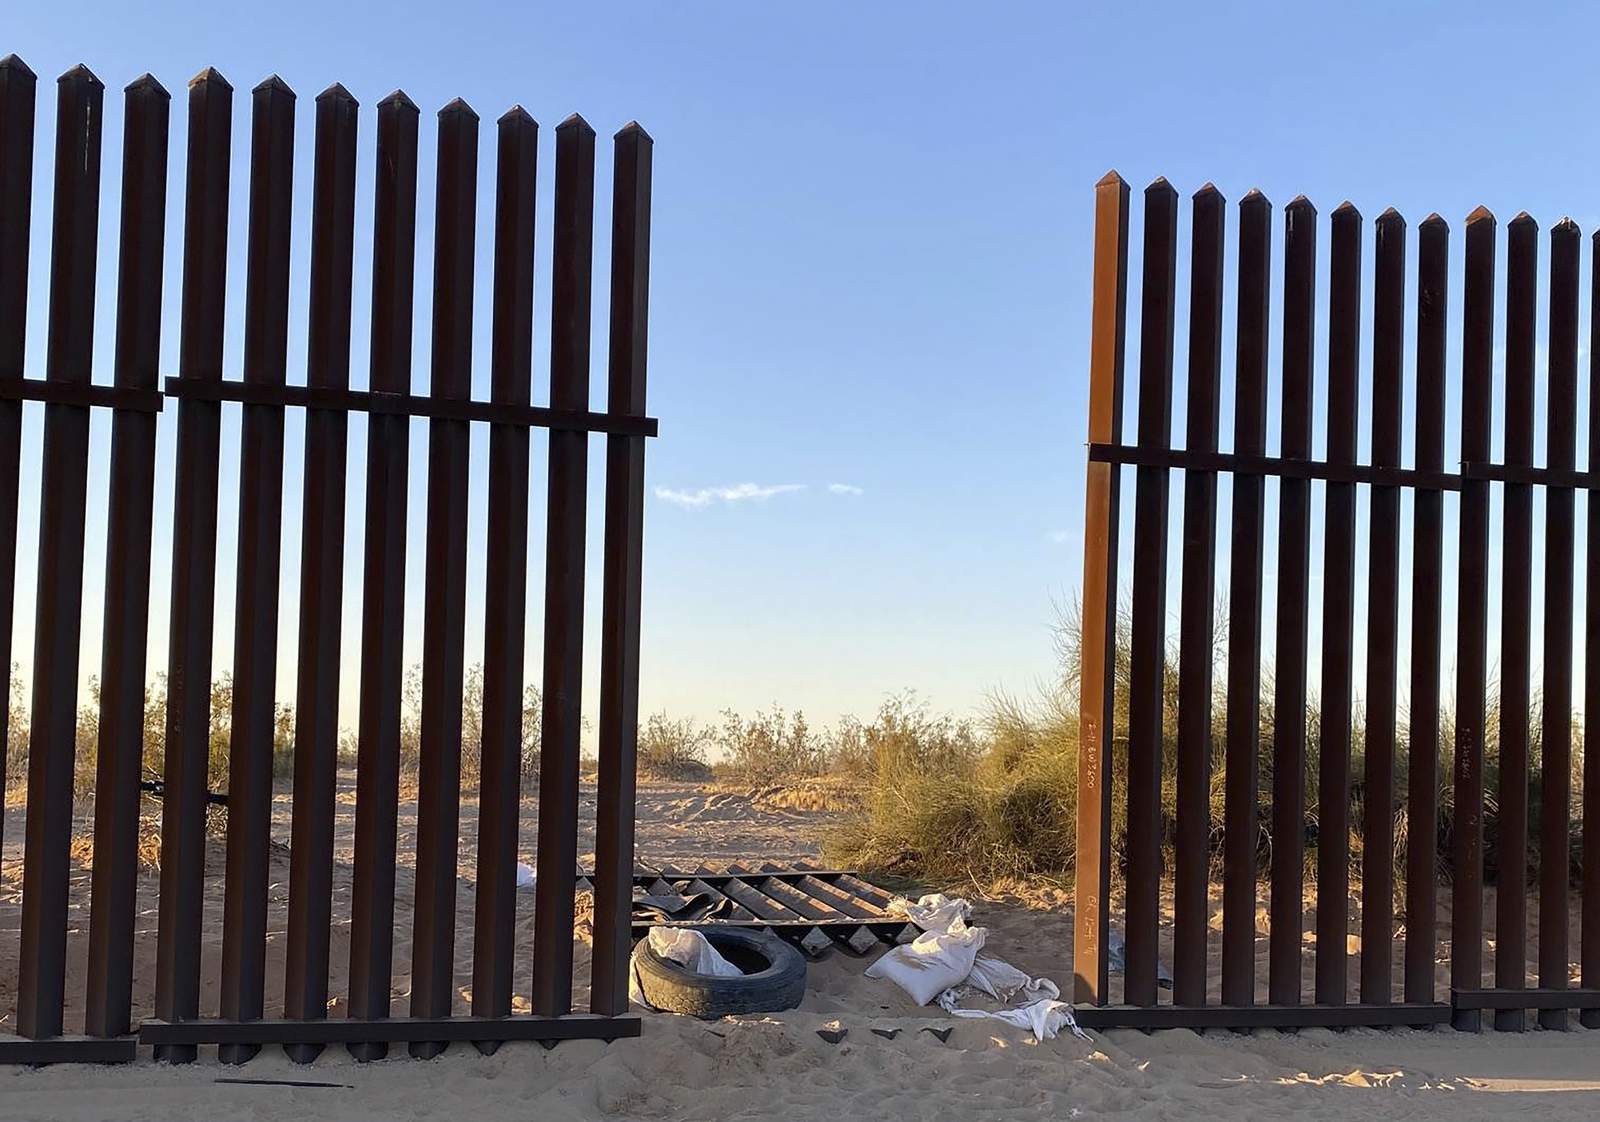 SUV in California crash came through hole in border fence with Mexico: AP